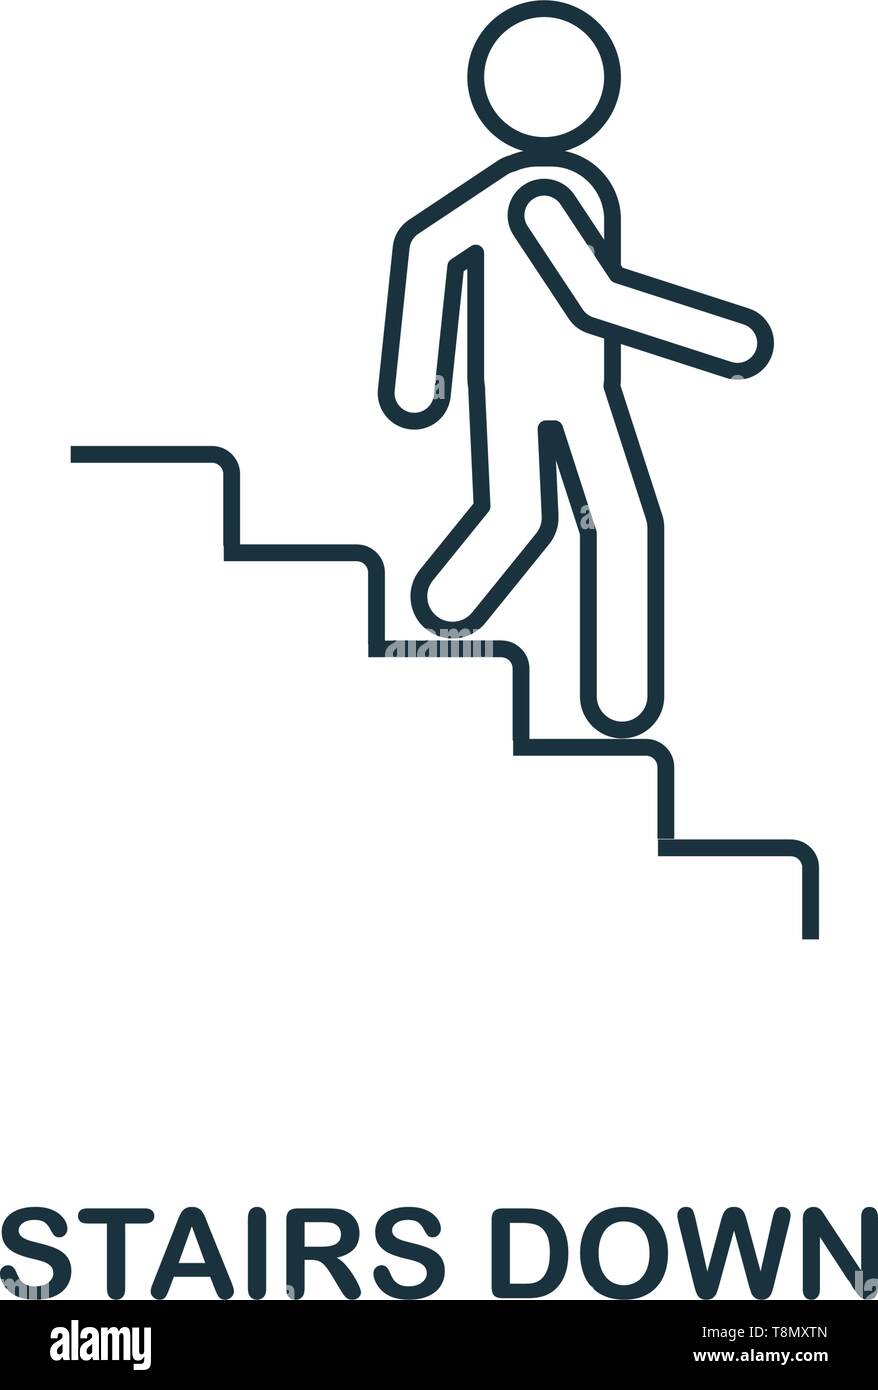 Stairs Down icon. Thin line outline style from shopping center sign icons collection. Premium stairs down icon for design, apps, software and more. Stock Vector